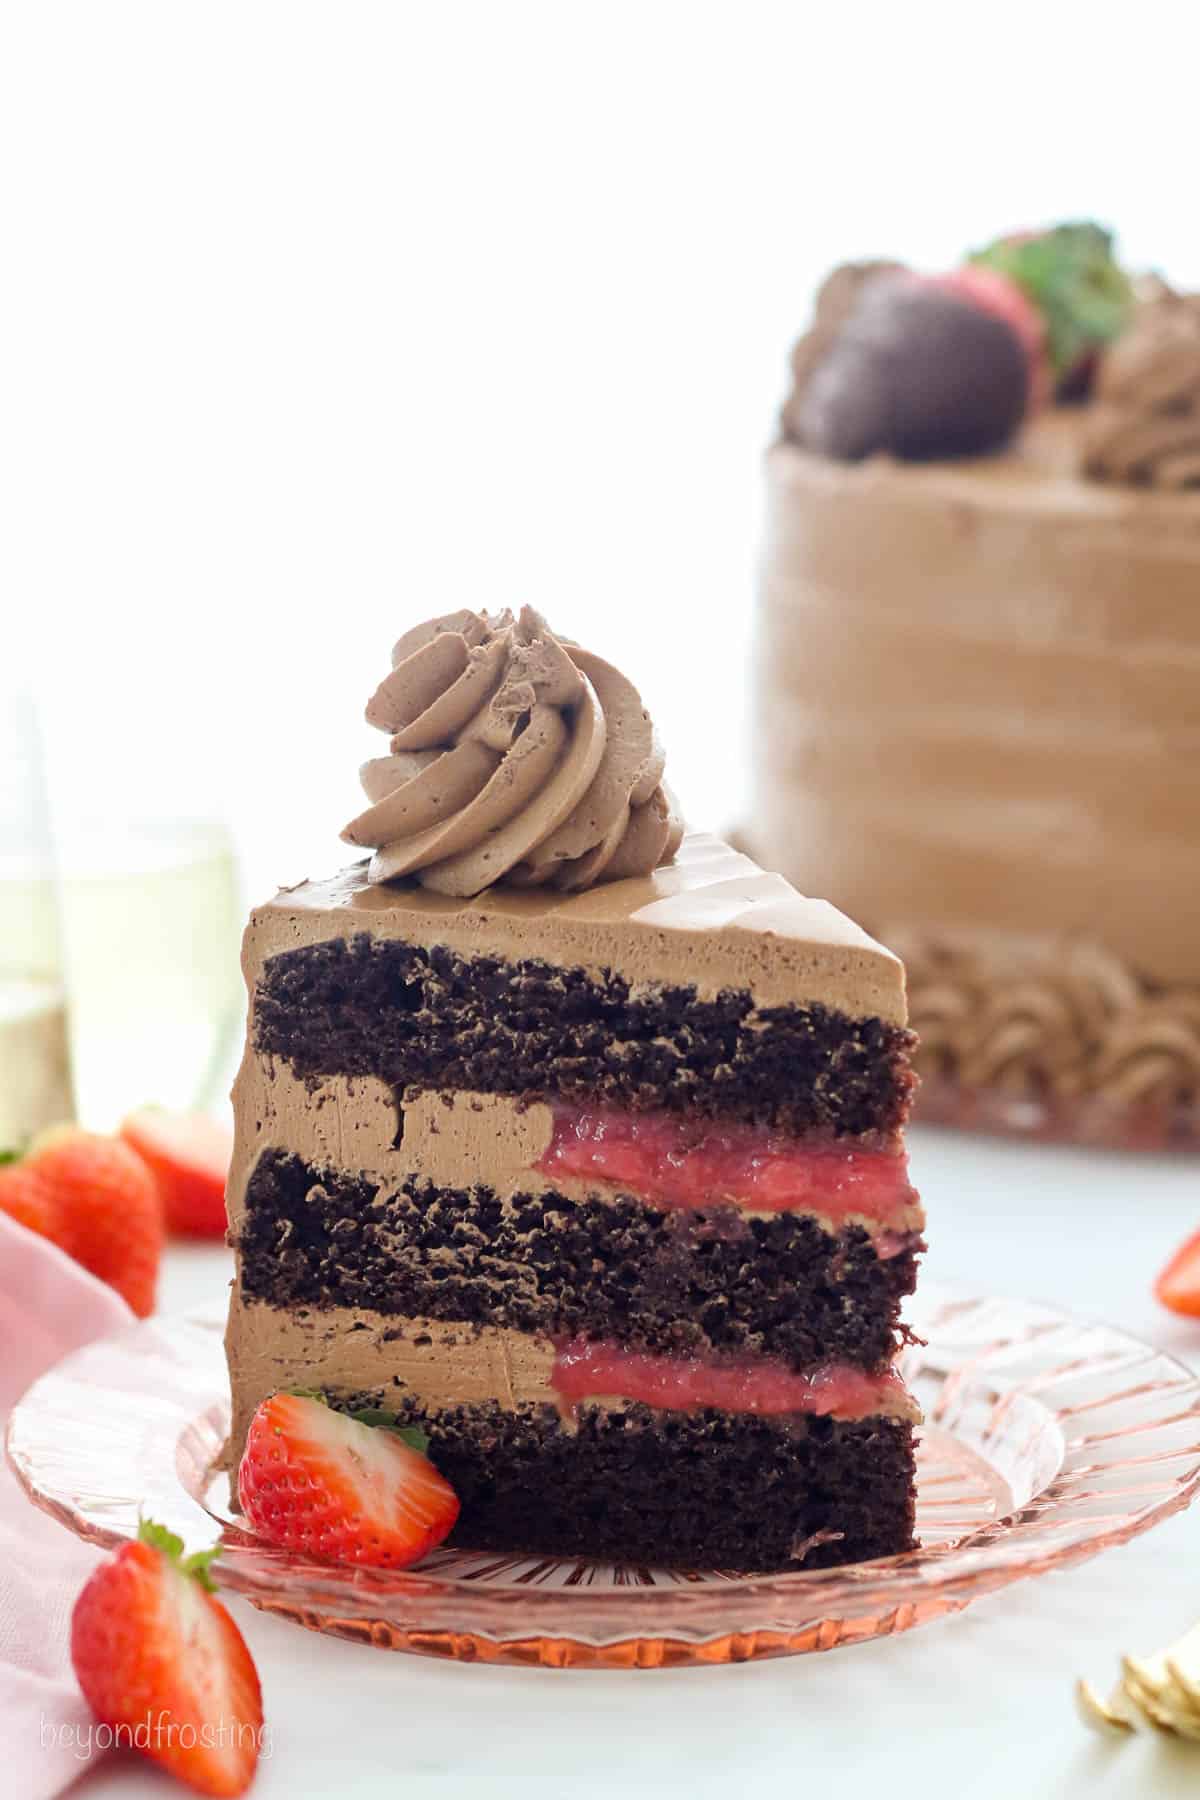 An upright slice of chocolate strawberry cake topped with a chocolate frosting swirl on a plate, with the rest of the cake in the background.